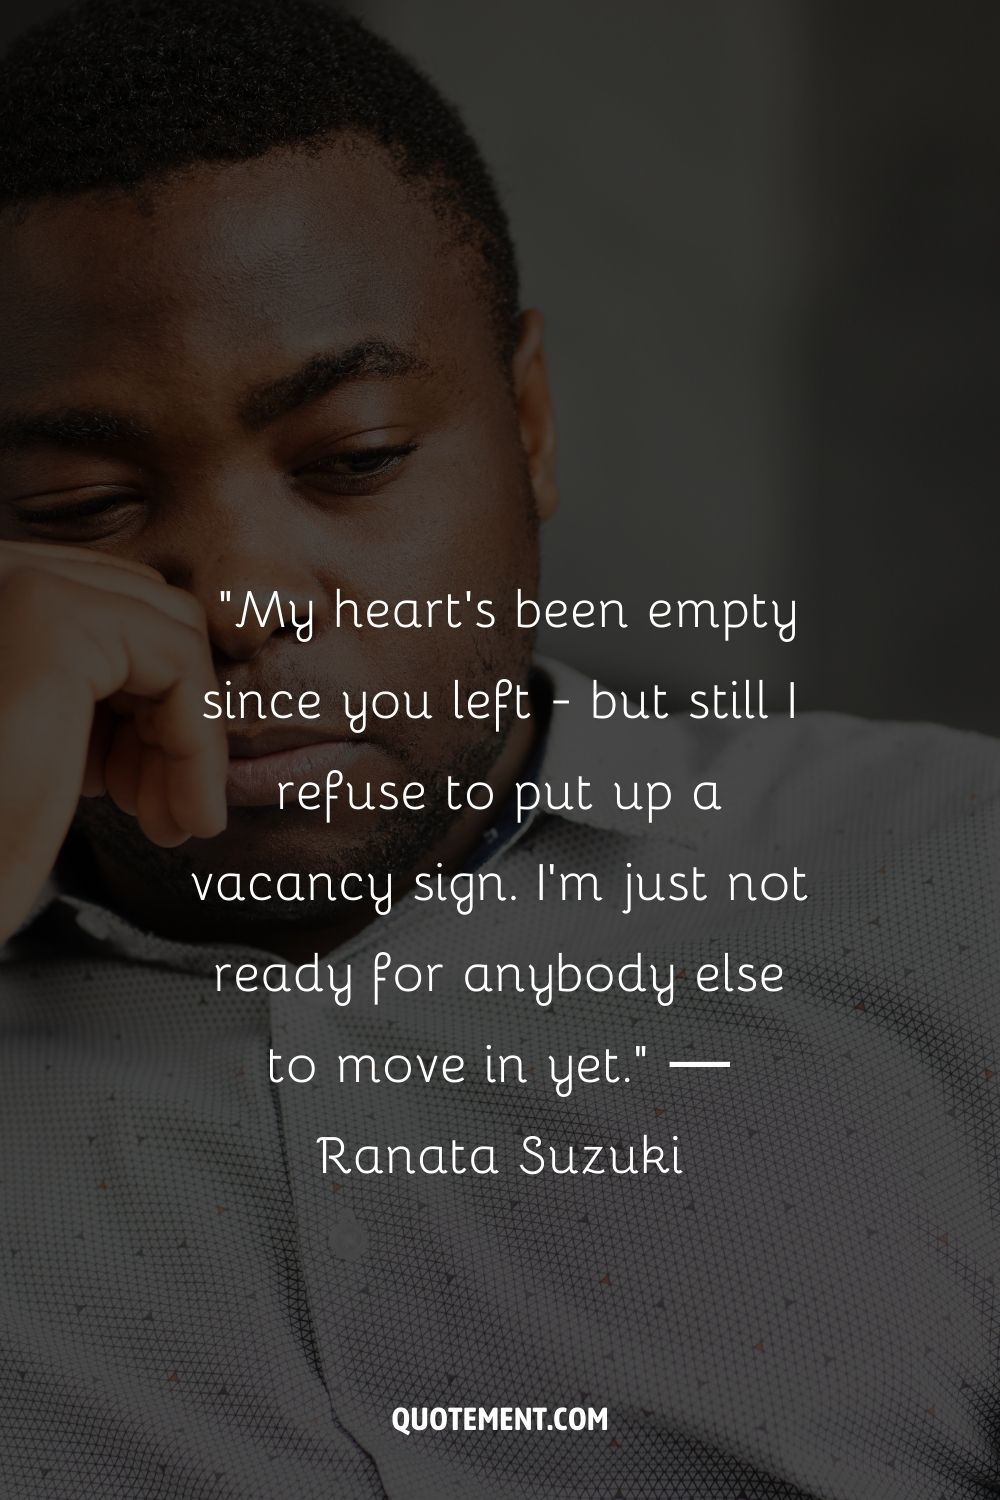 My heart’s been empty since you left - but still I refuse to put up a vacancy sign. I’m just not ready for anybody else to move in yet